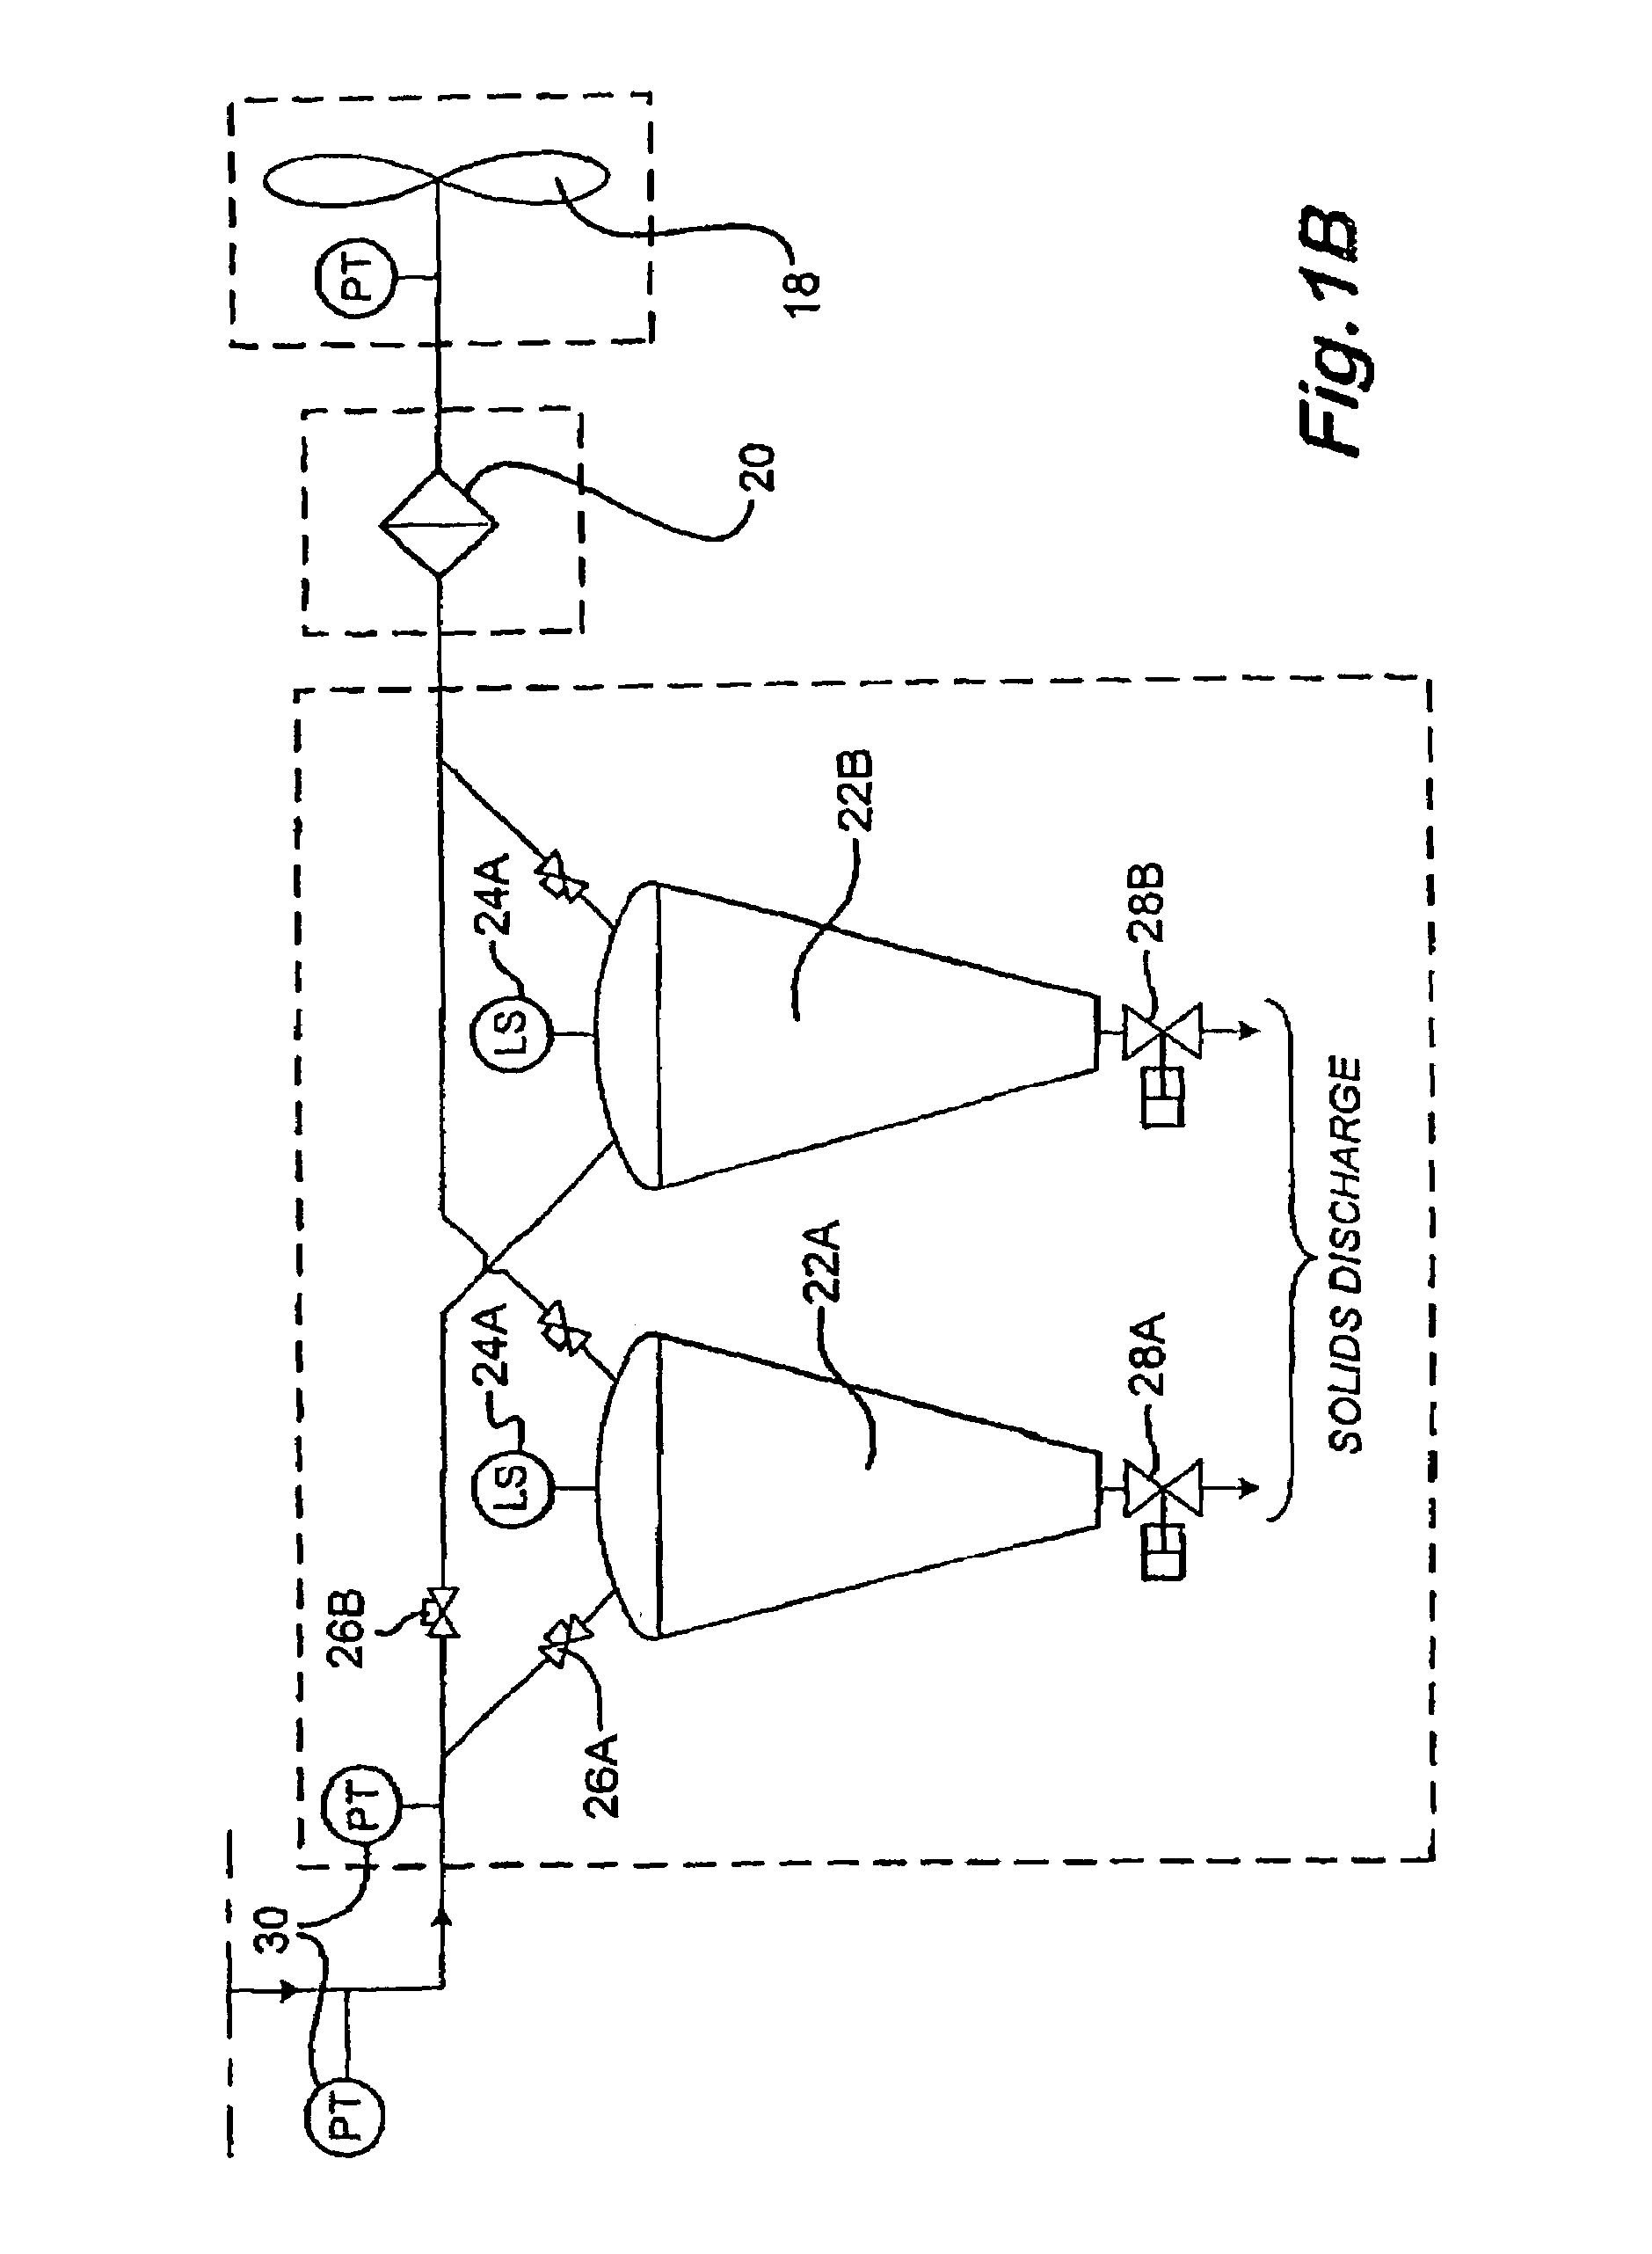 Apparatus and method for transporting waste materials